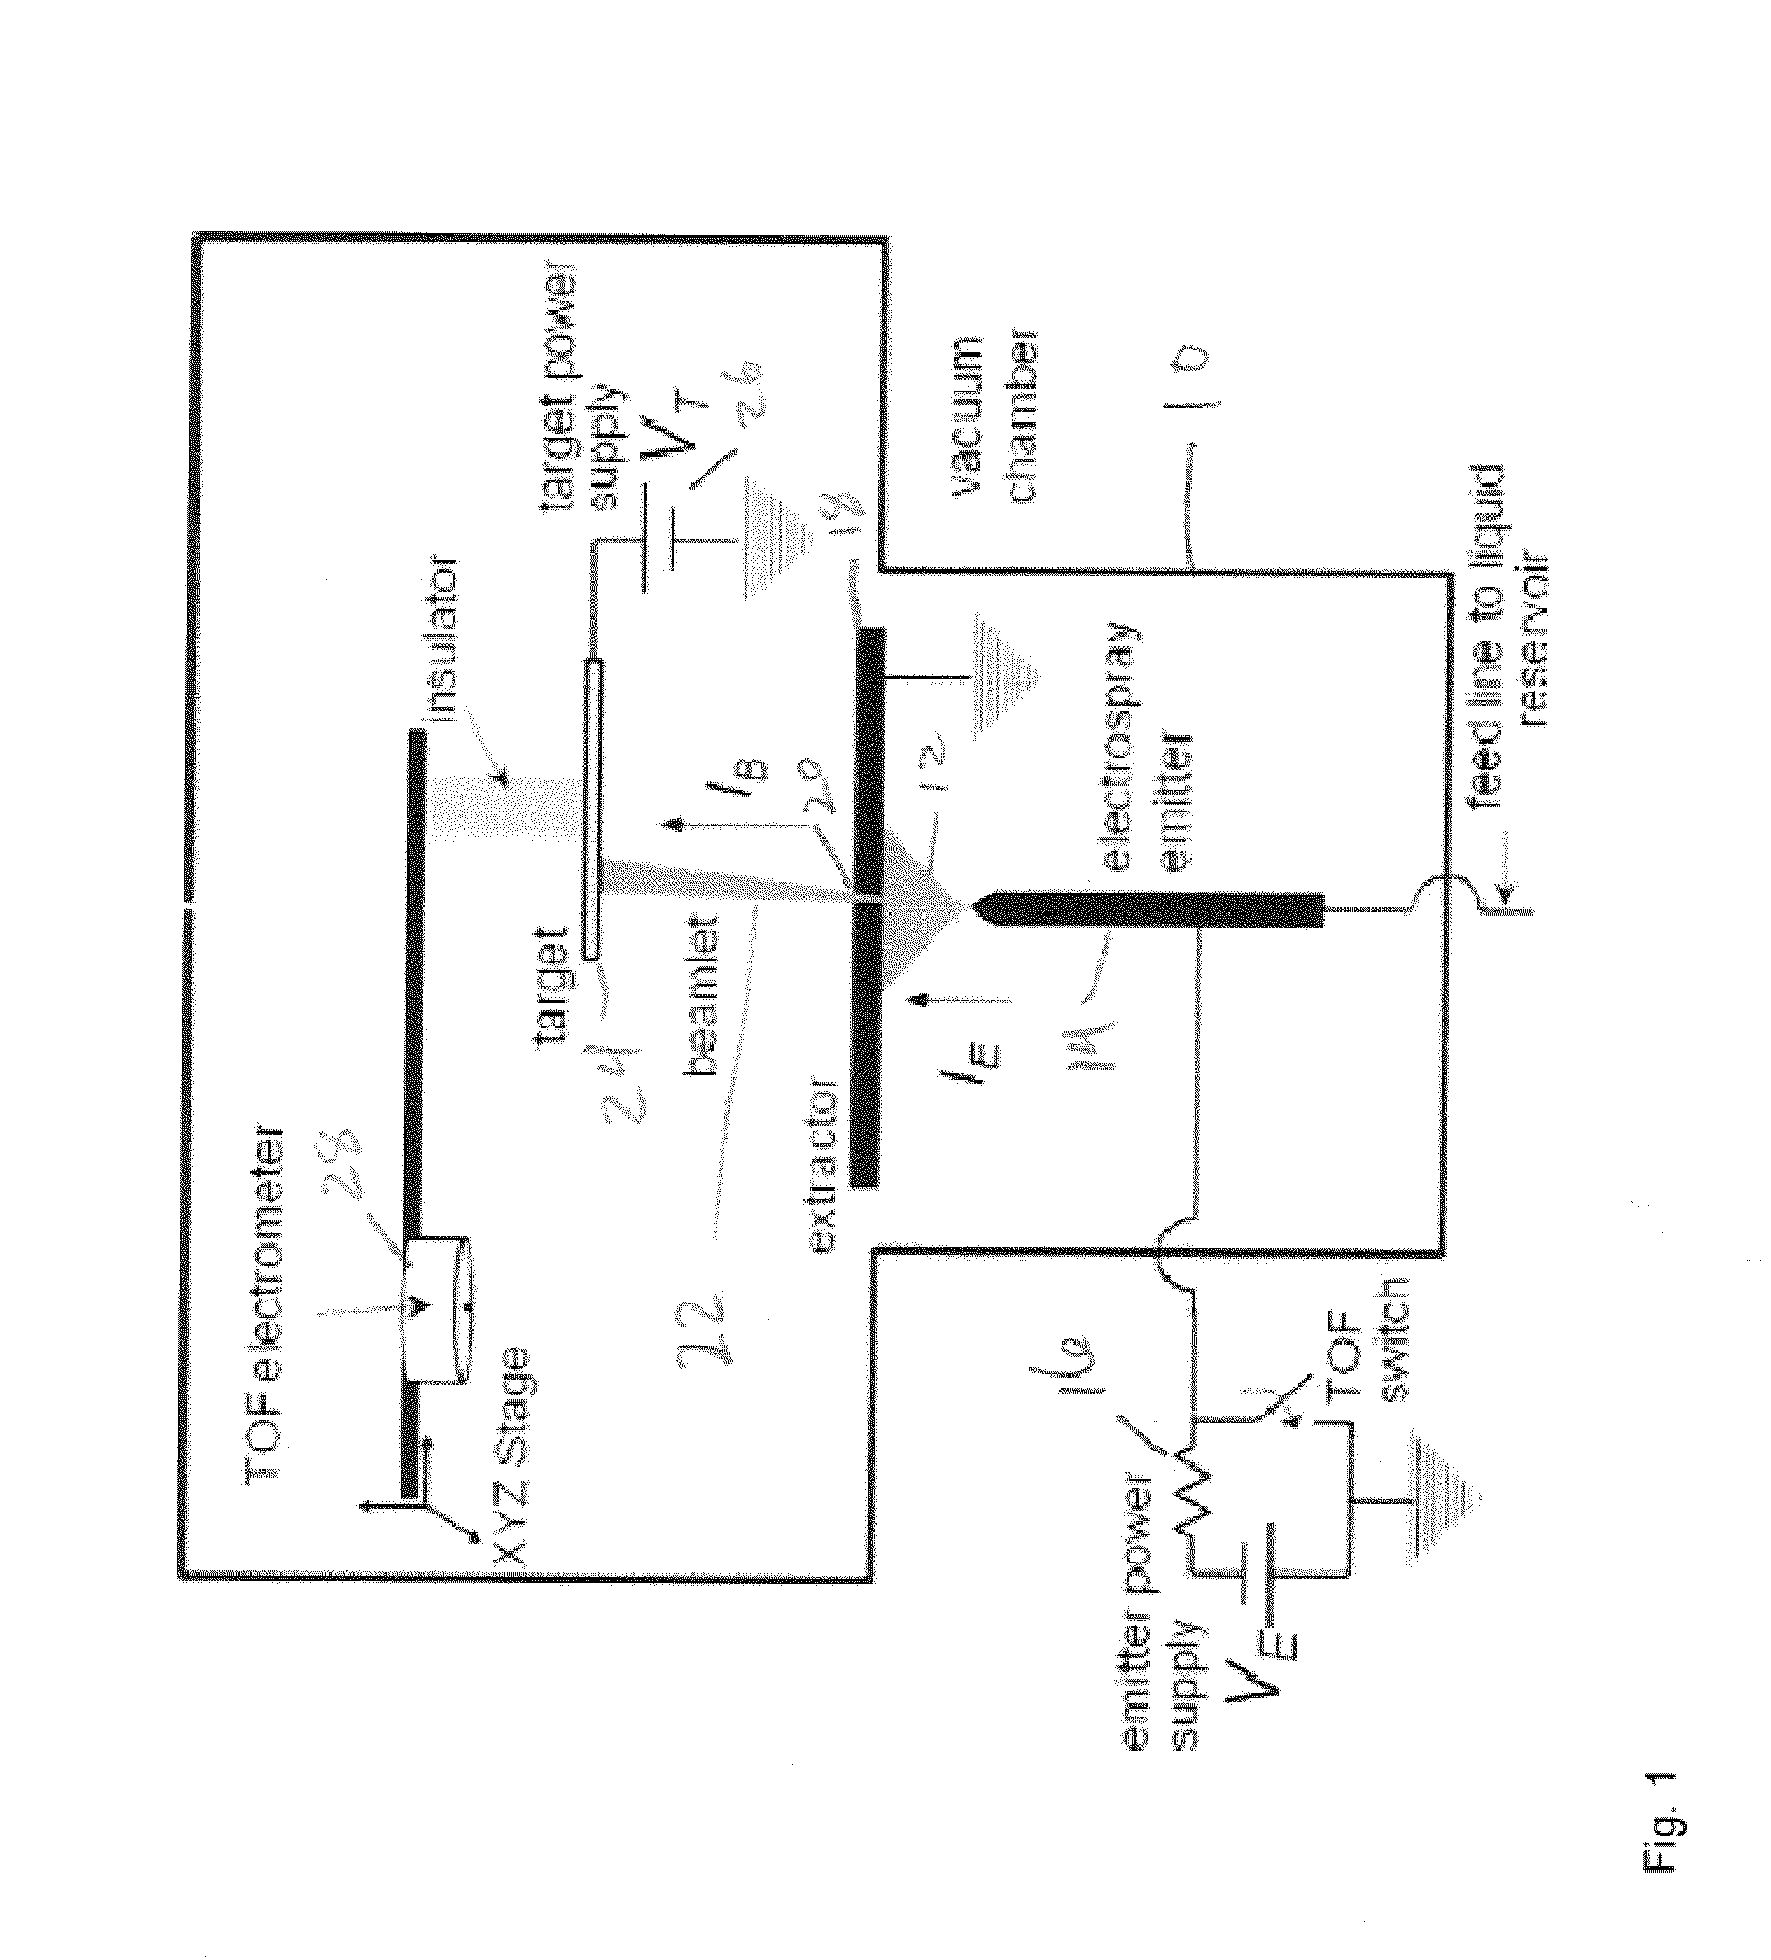 Method and apparatus for providing beams of nanodroplets for high sputtering rate of inert materials